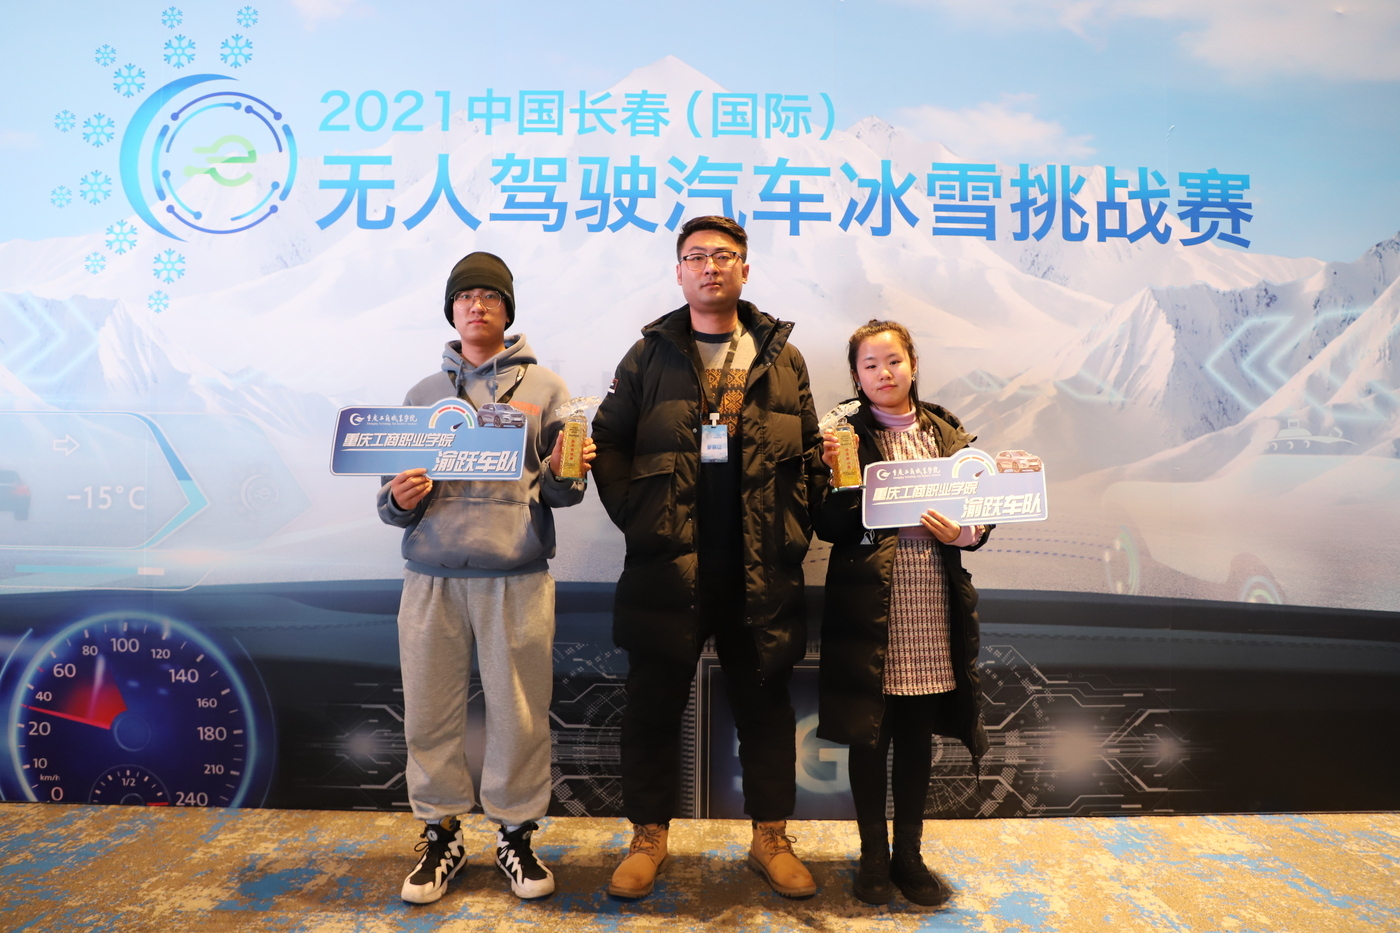 The "Yu yue Fleet" of Chongqing Business Vocational College , successfully won the Urban Ice and Snow Challenge Championship.